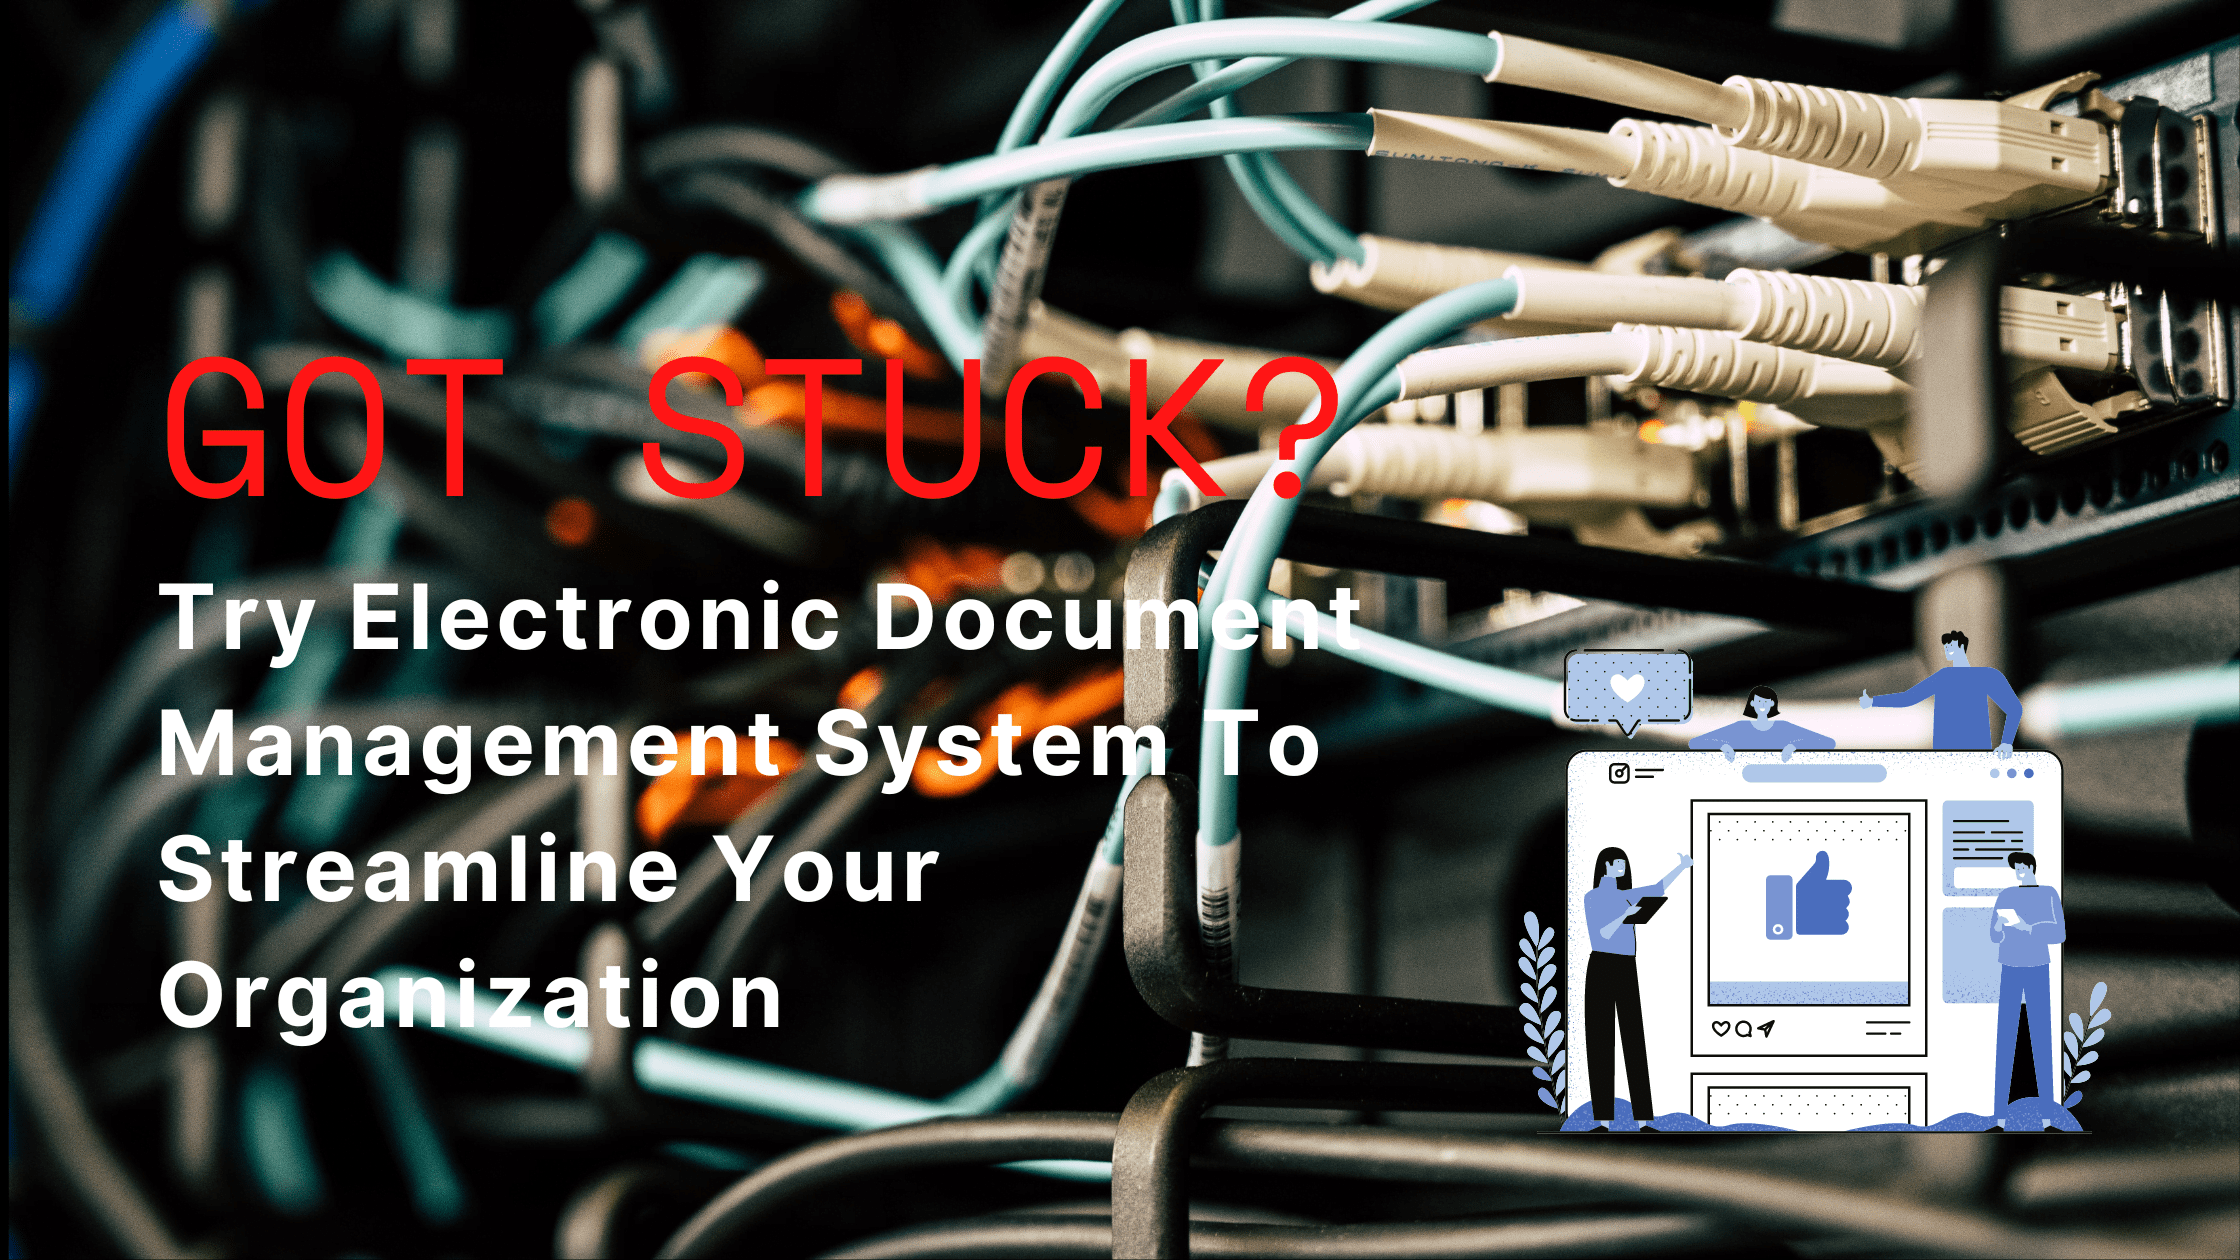 Got Stuck? Try Electronic Document Management System To Streamline Your Organization